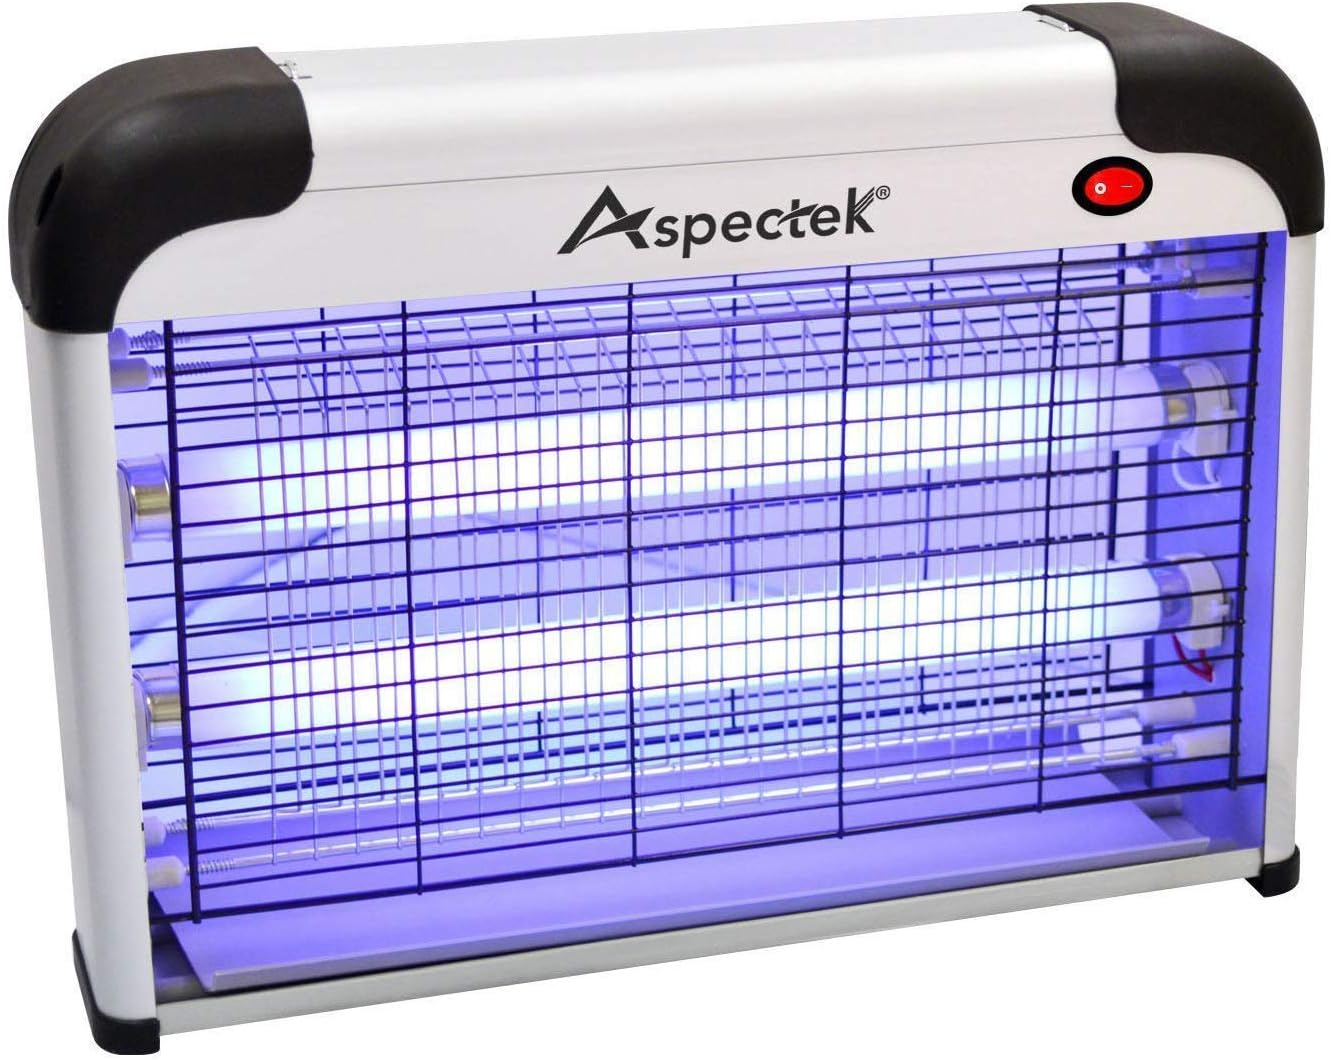 Aspectek - Fly and Insect Killer 20W UV light Attract to Zap Flying Insects Playing Excellent Role as Bug Zapper, Insect Killer, Fly Zapper, Fly Killer, Fly Swatter, Wasp Killer UK PLUG